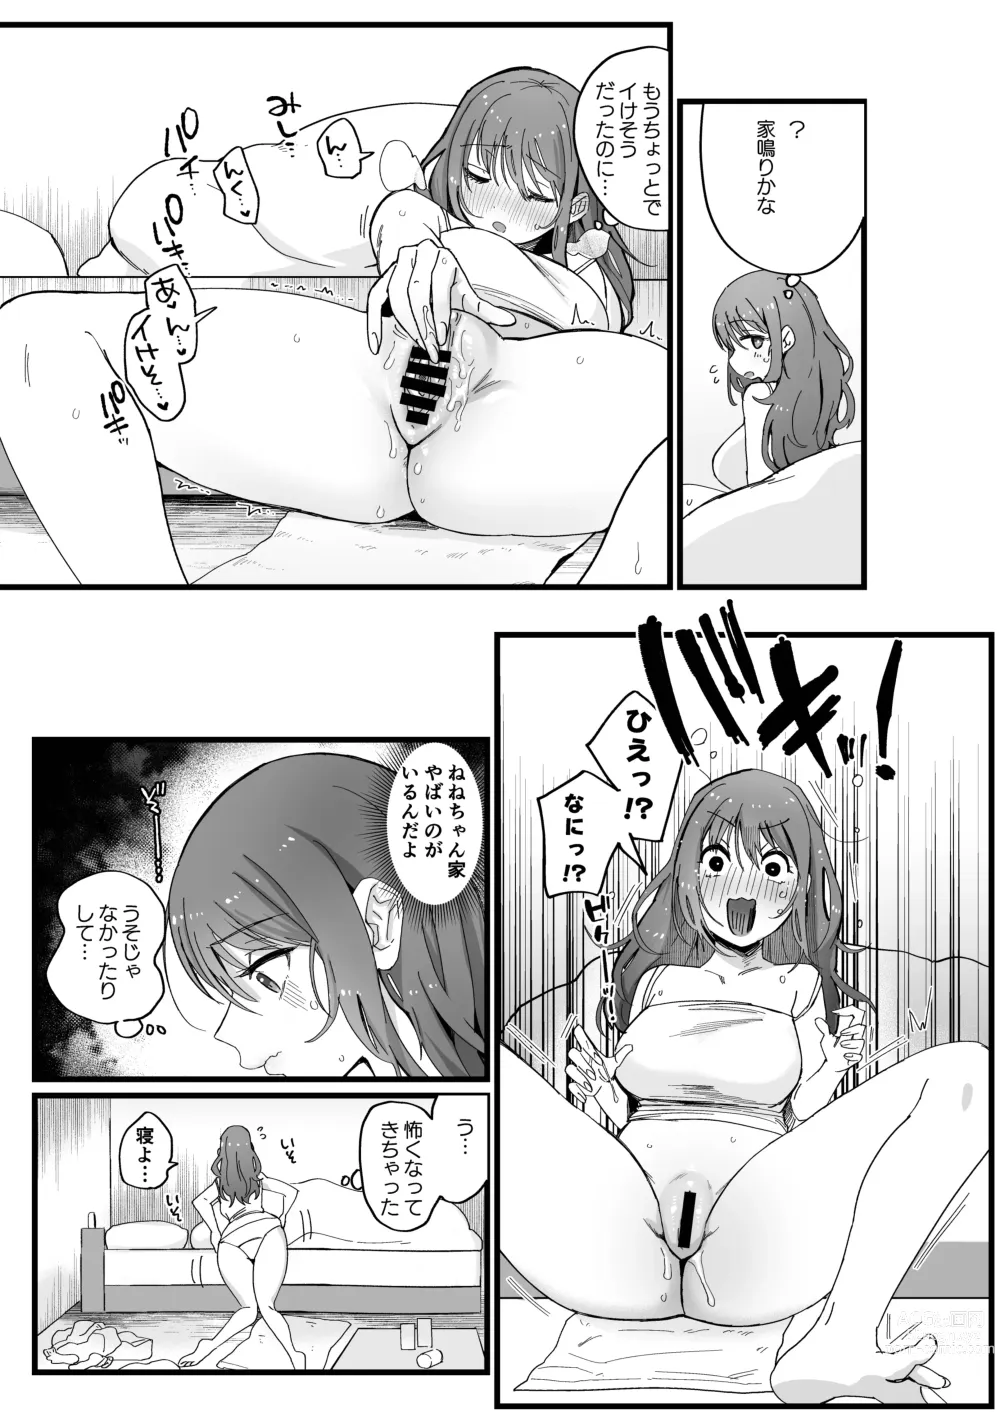 Page 8 of doujinshi Erotic Ghost